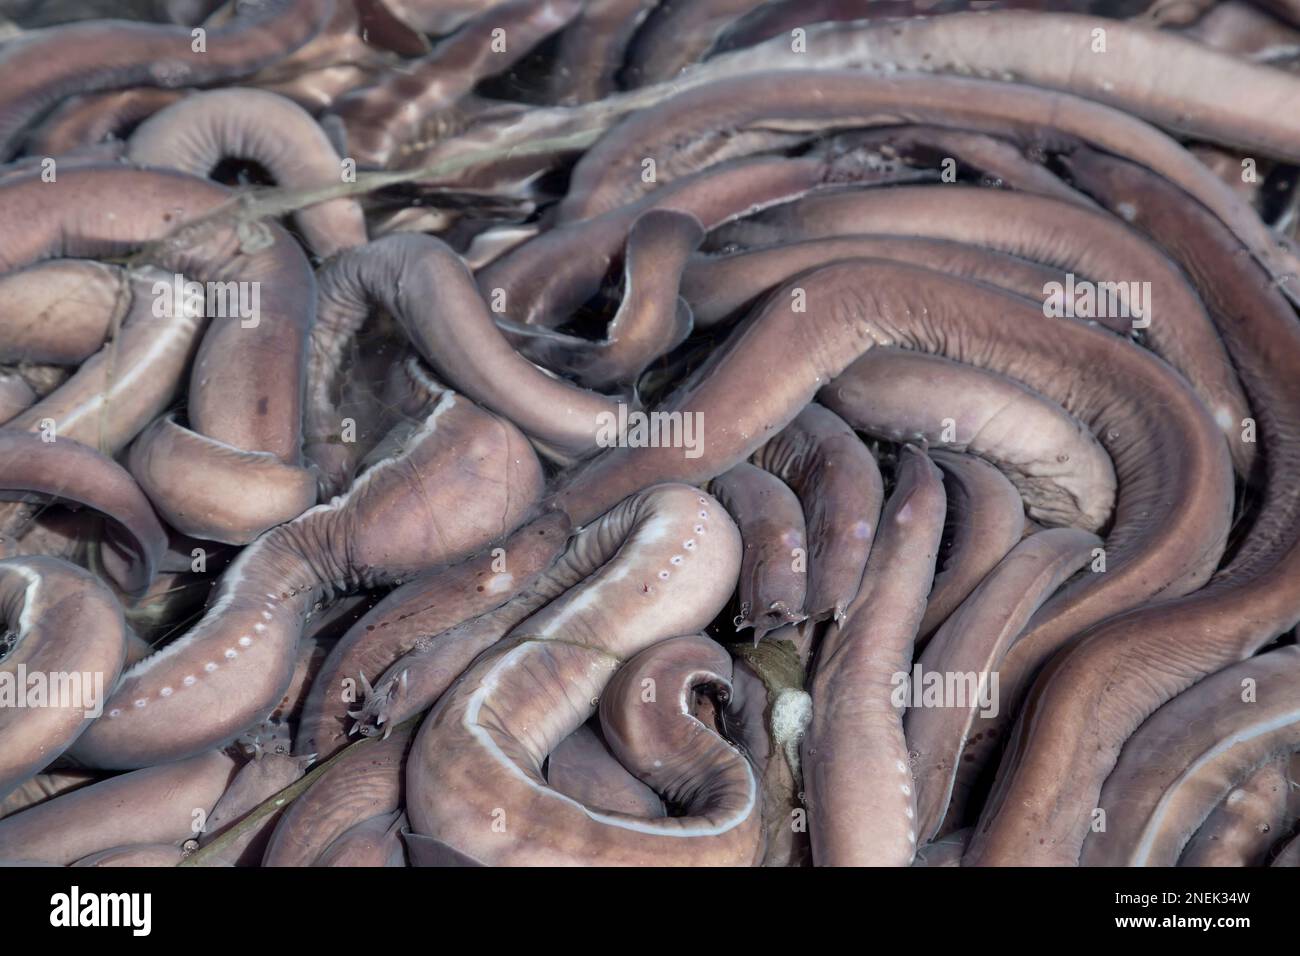 Pacific Hagfish 'Eptatretus stoutii' catch, also called Slime Eel, in sea water exporting live to South Korea for human consumption. Stock Photo